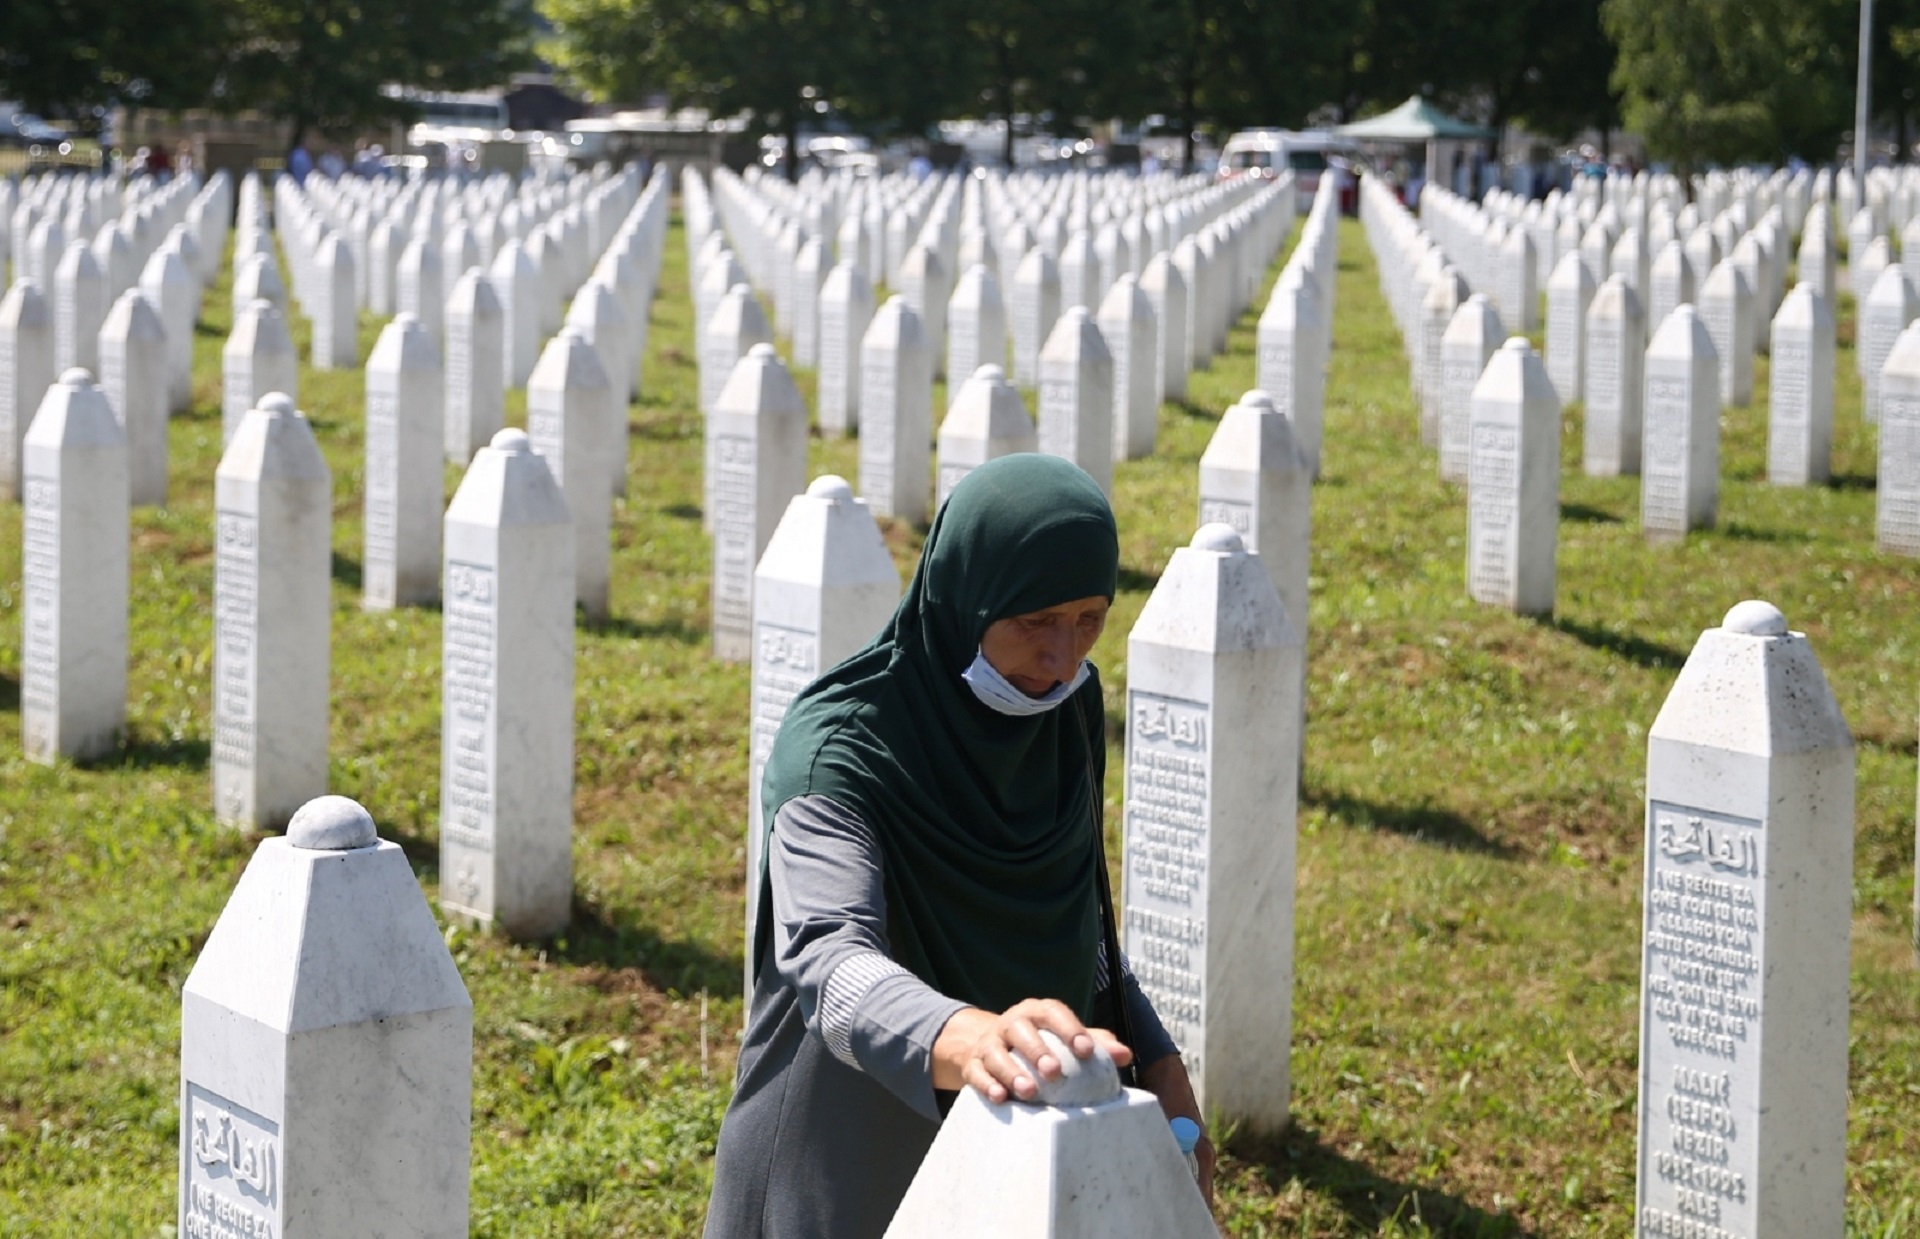 Bosnia and Herzegovina commemorates 25th anniversary of Srebrenica massacre, in Potocari A woman is seen at a graveyard, ahead of a mass funeral in Potocari near Srebrenica, Bosnia and Herzegovina July 11, 2020. Bosnia marks the 25th anniversary of the massacre of more than 8,000 Bosnian Muslim men and boys, with many relatives unable to attend due to the coronavirus disease (COVID-19) outbreak. REUTERS/Dado Ruvic DADO RUVIC